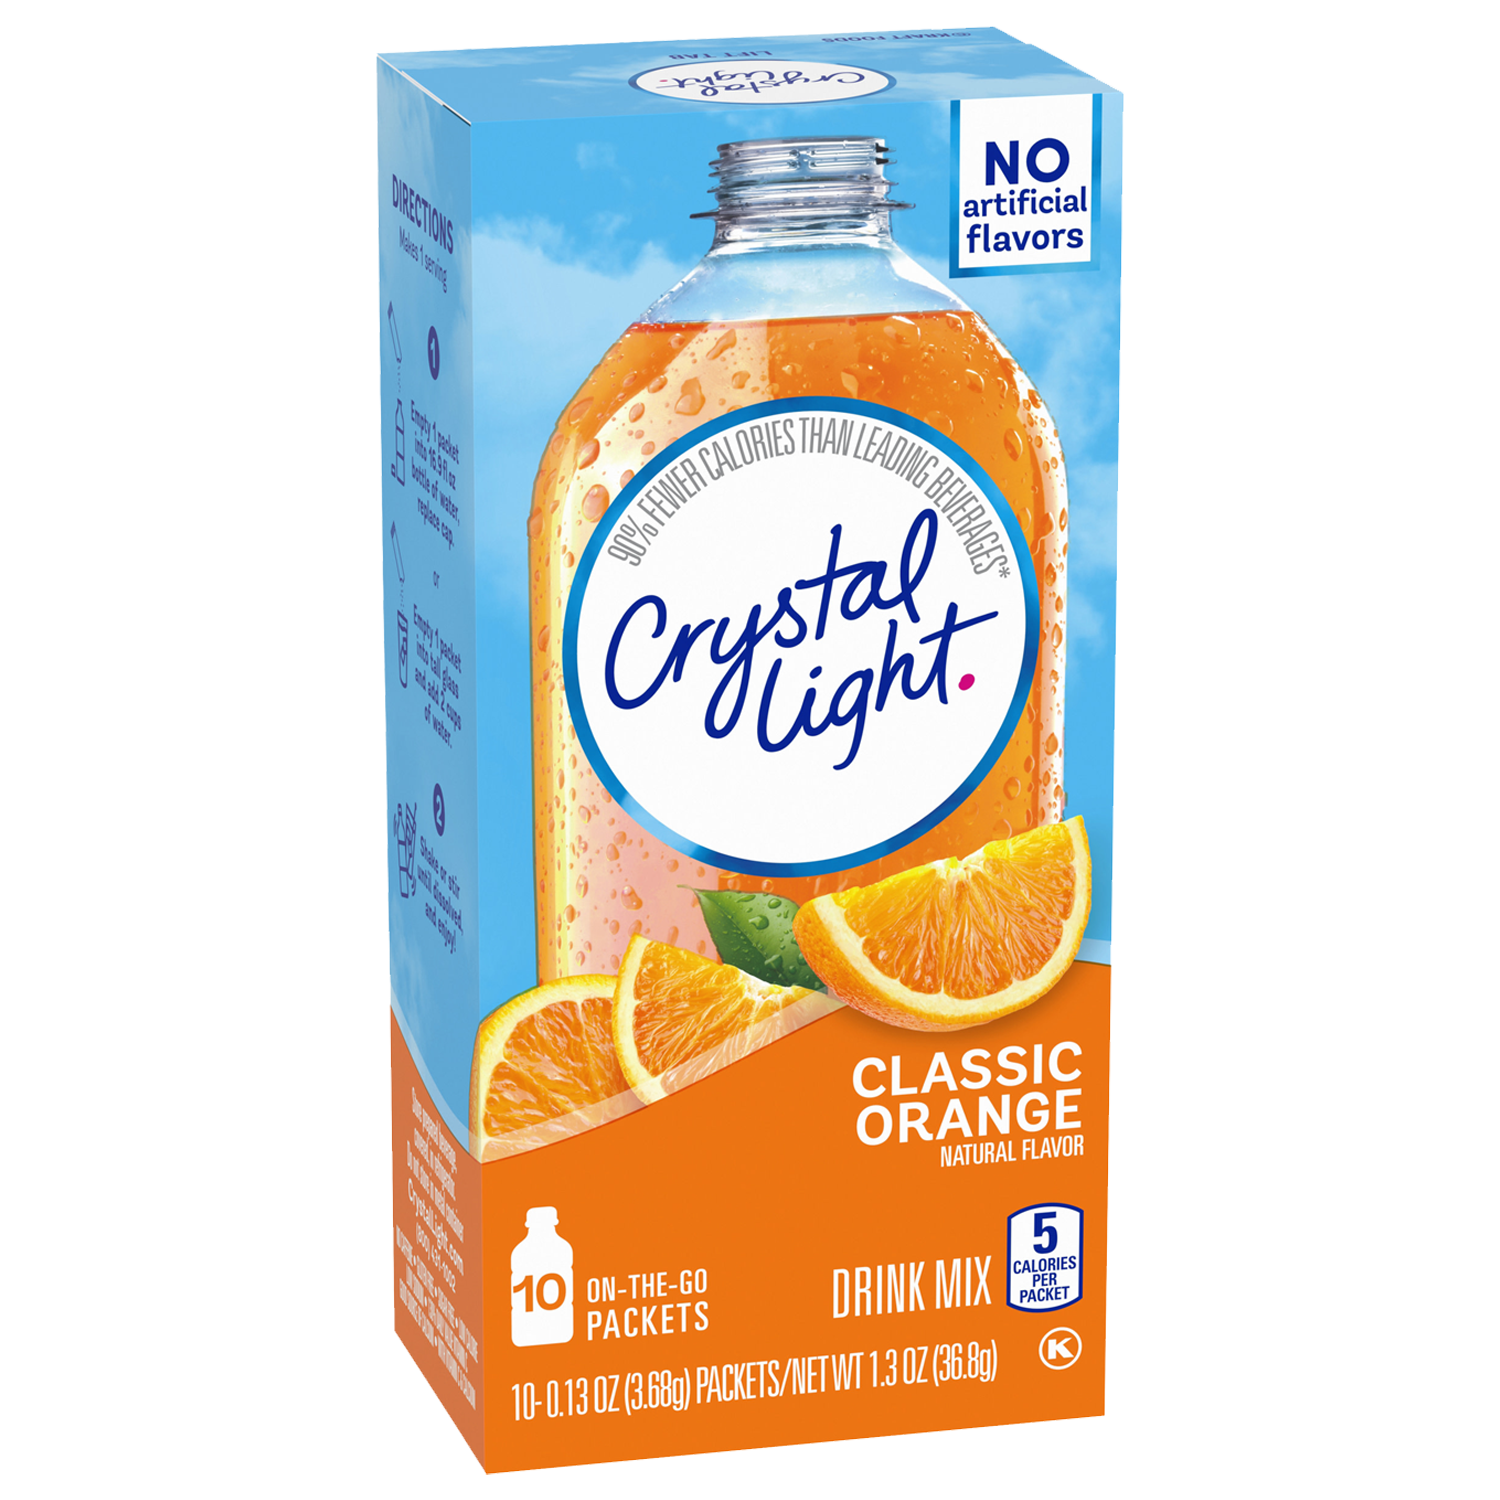 Crystal Light On The Go Classic Orange Drink Mix 36.8g sold by American grocer Uk